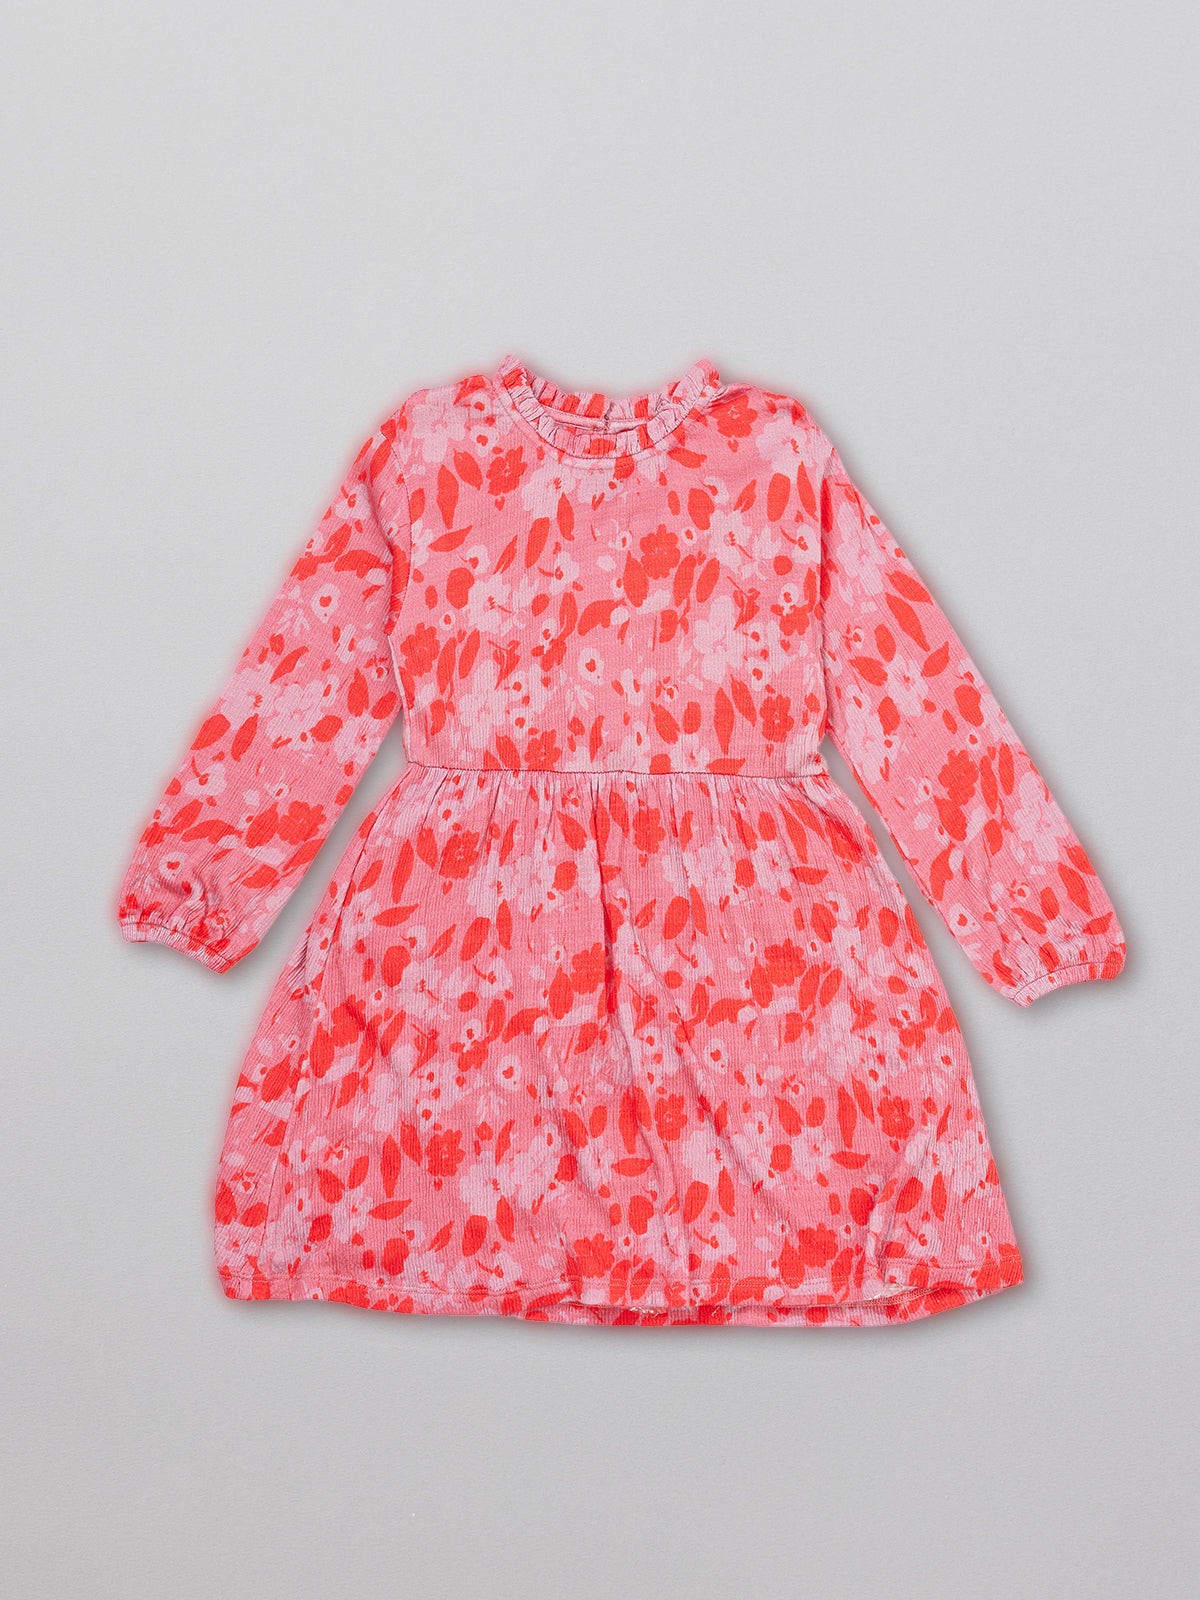 Eco-friendly kids smock dress in pink, pictured from the front.